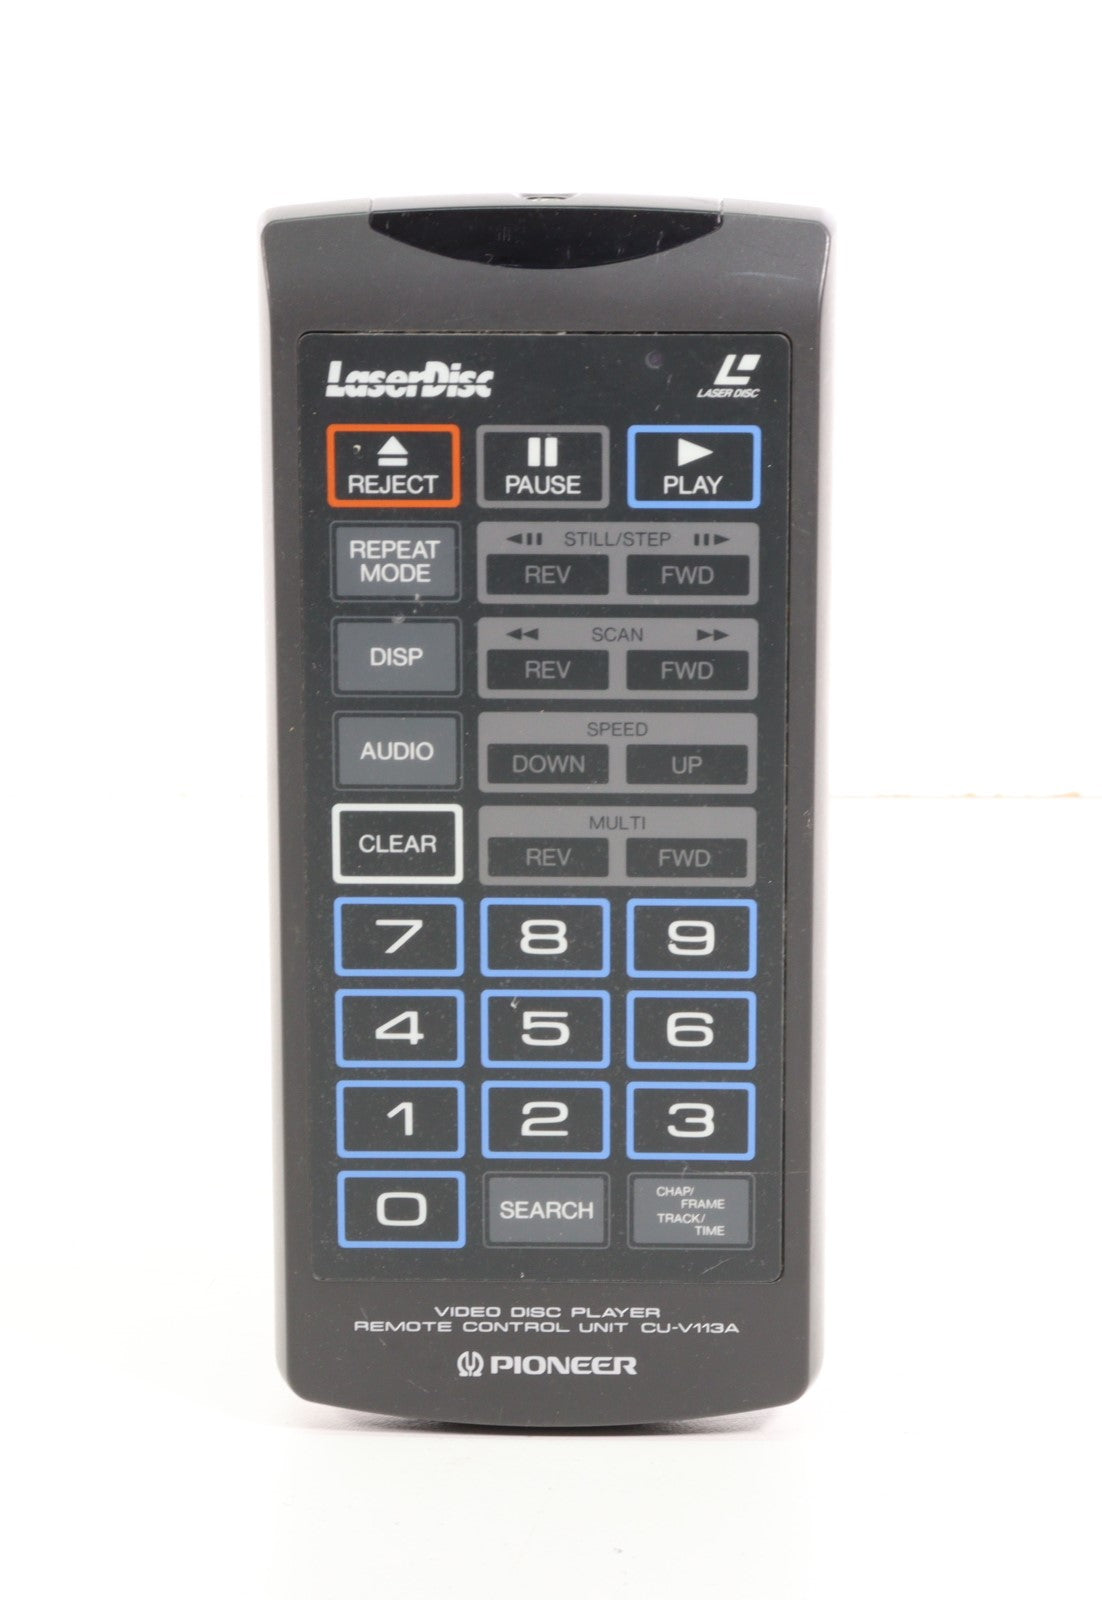 Pioneer CU-V113A Remote Control for LaserDisc Player CLD-V2600 and Mor